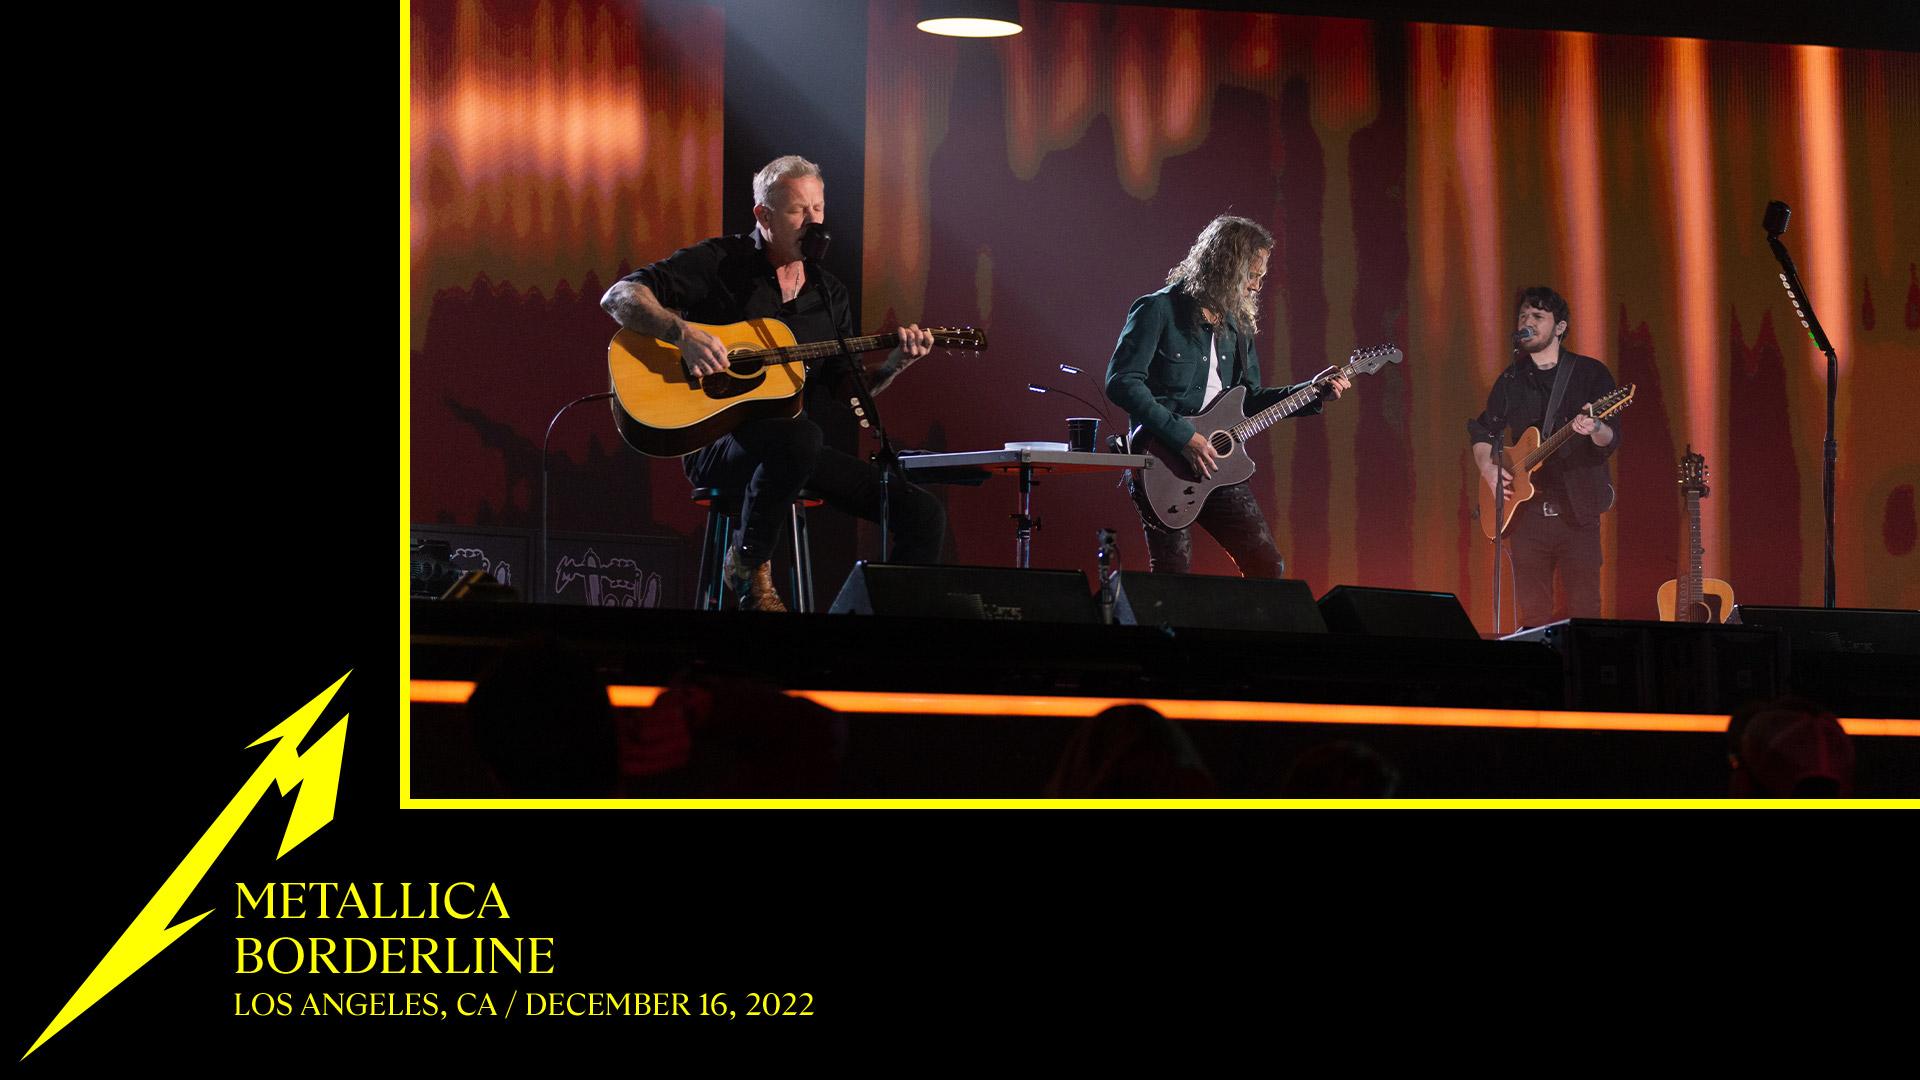 Watch Metallica perform "Borderline" live for the first time at Microsoft Theater in Los Angeles, CA on December 16, 2022.